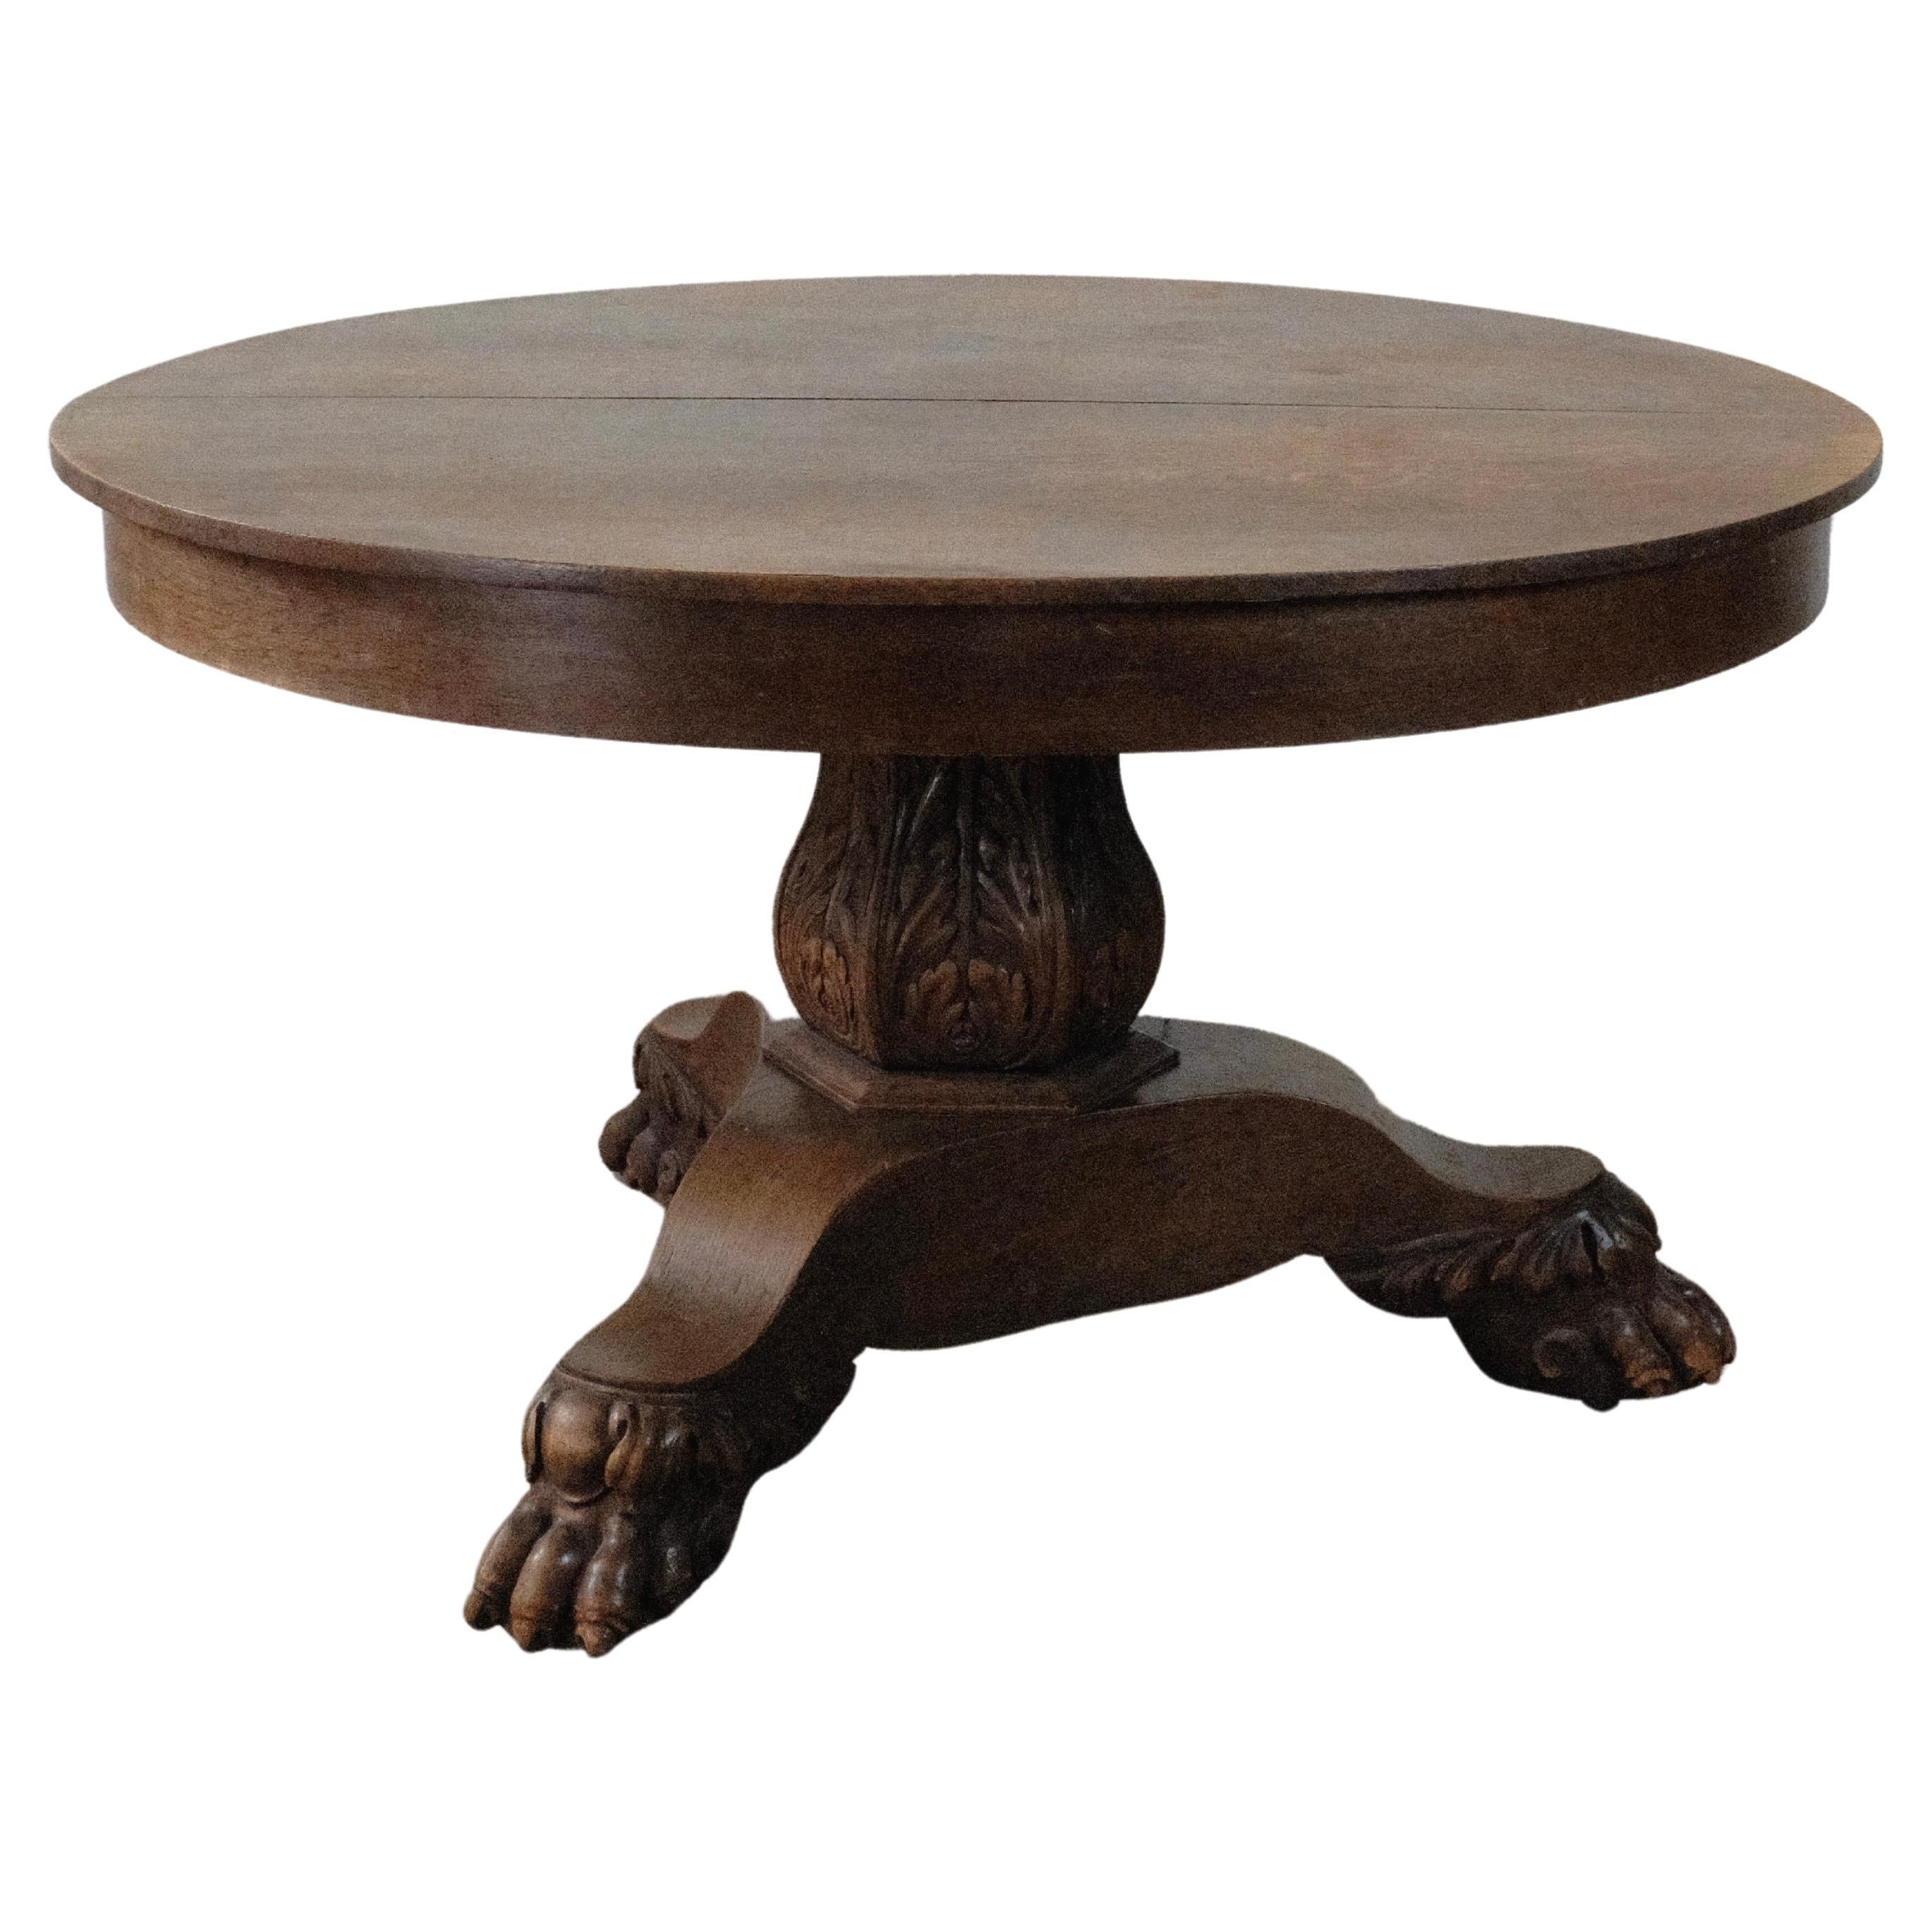 Antique Round Oak Claw Foot Pedestal Dining Table